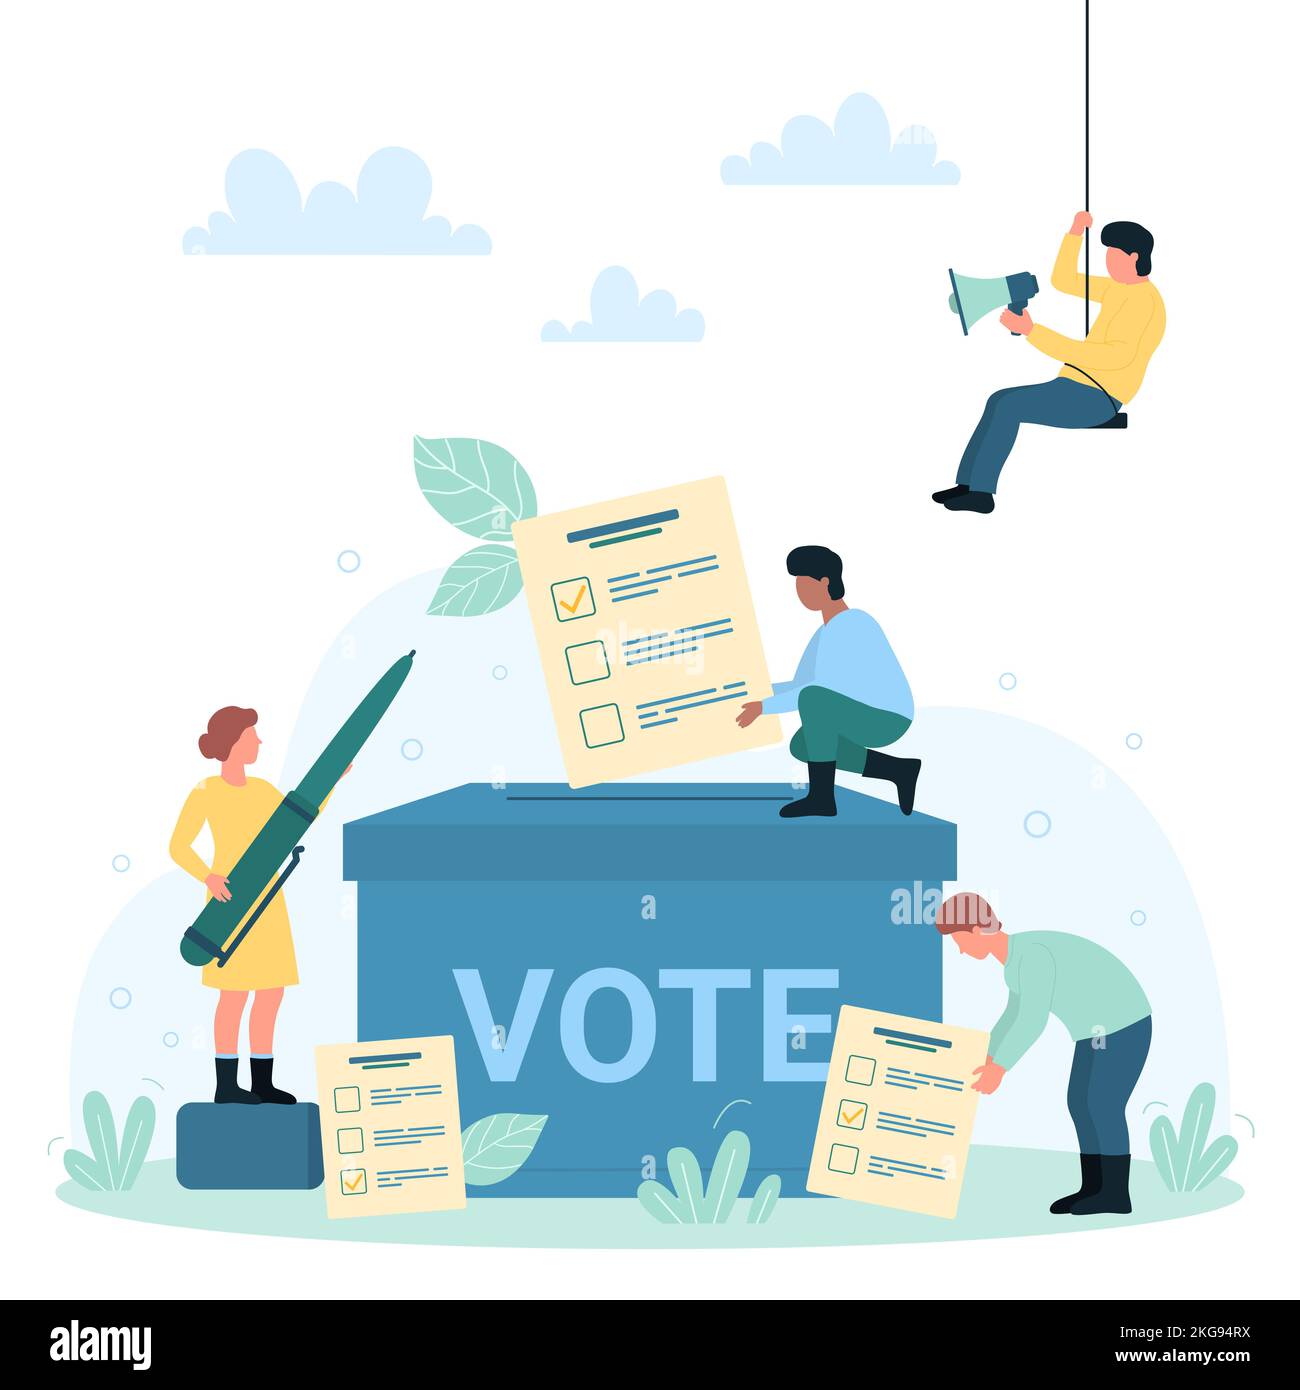 Referendum campaign, democracy and votes vector illustration. Cartoon tiny people vote in elections, putting ballot papers into big public voting box, voter holding pen to check survey checklist Stock Vector